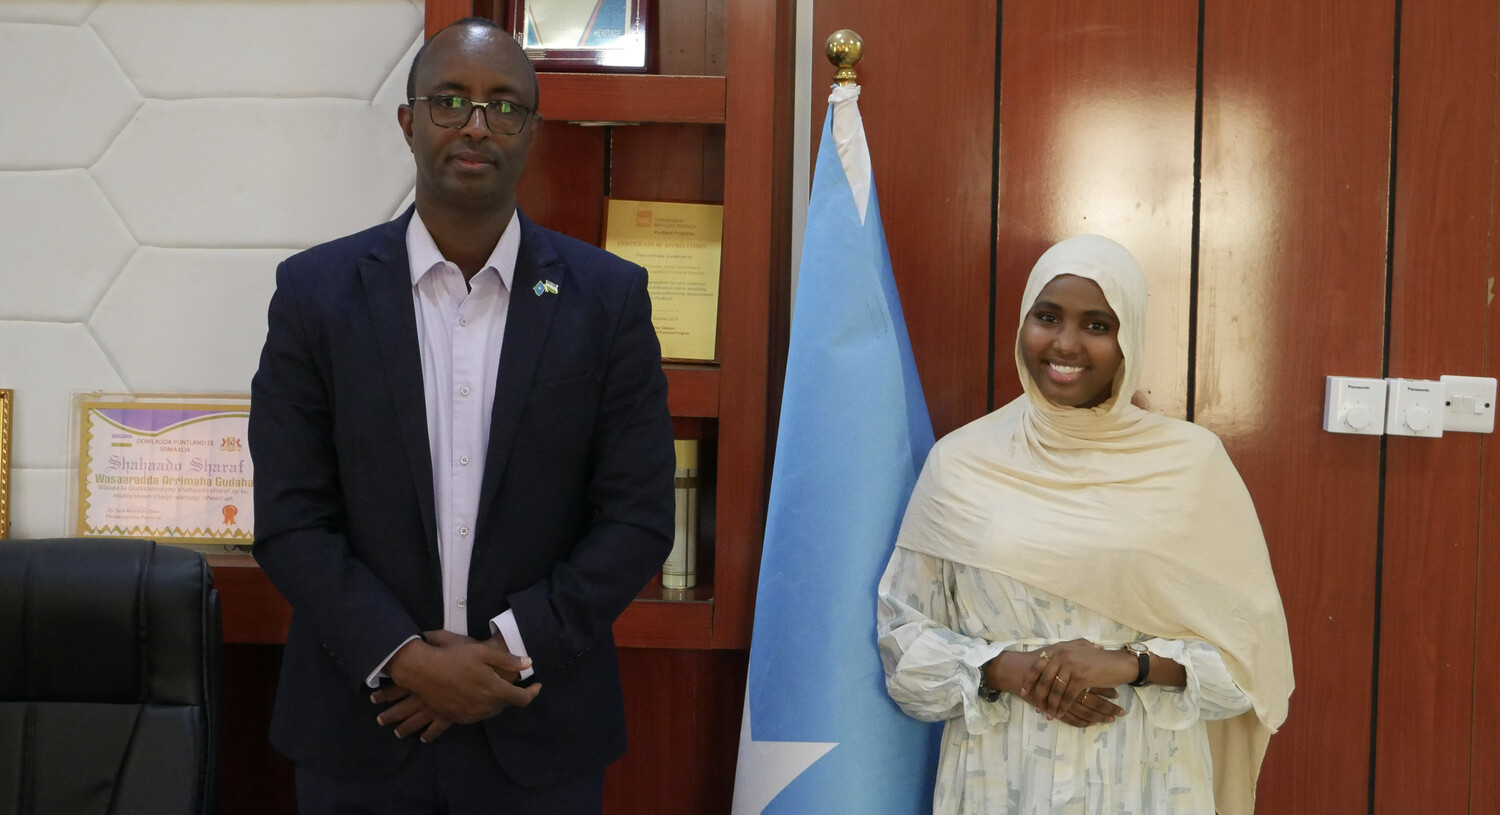 2L Samia Osman with the Minister of Interior, Federal Affairs & Democratisation of the Puntland State Government in Somalia, HE Mohamed Abdirahman Ahmed